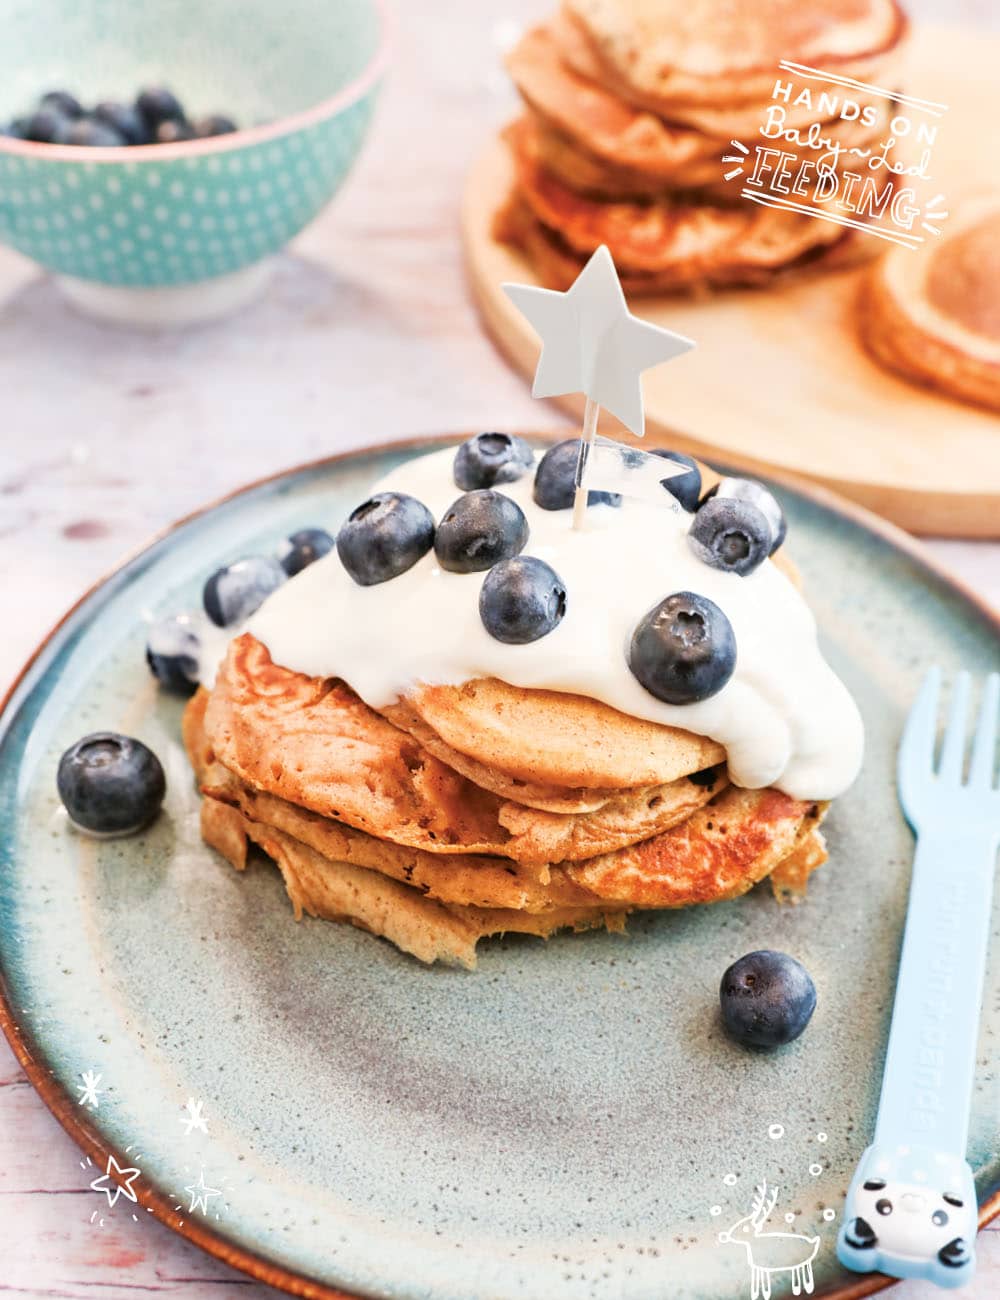 Light and fluffy sweet potato and buttermilk pancakes, spiced with cinnamon and nutmeg, topped with protein packed Greek yogurt and antioxidant rich blueberries. A healthy baby led weaning breakfast. This easy recipe makes a festive Christmas breakfast recipe! #sweetpotato #pancakes #christmasrecipe #holidayrecipe #babyledweaning #babyledfeeding